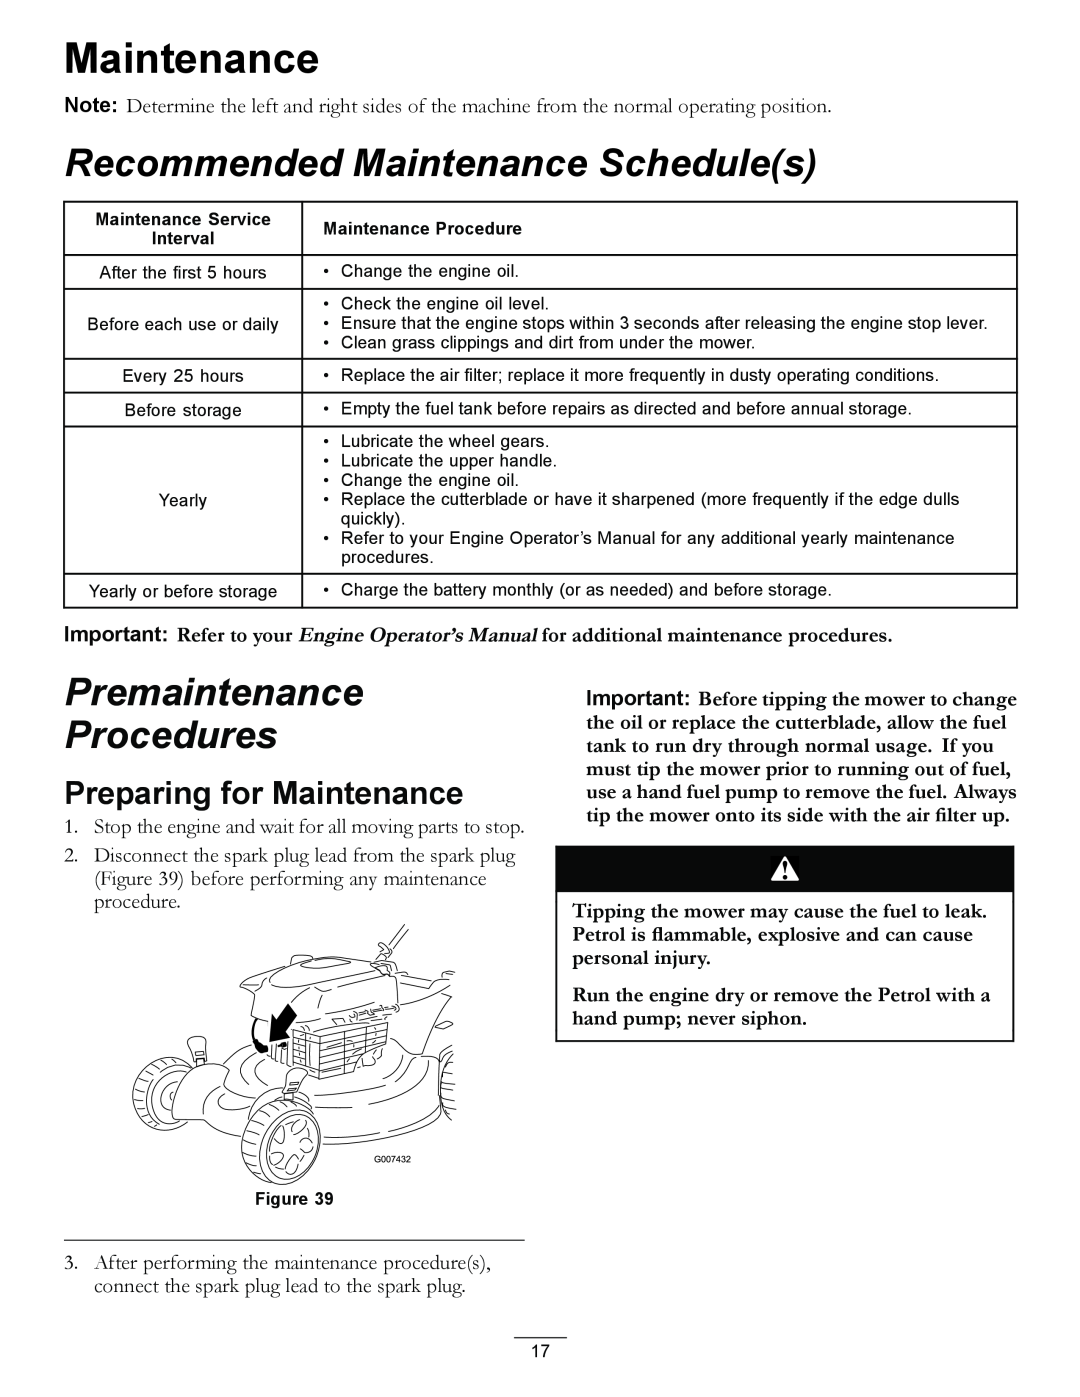 Hayter Mowers R53S manual Recommended Maintenance Schedules, Premaintenance Procedures, Preparing for Maintenance 